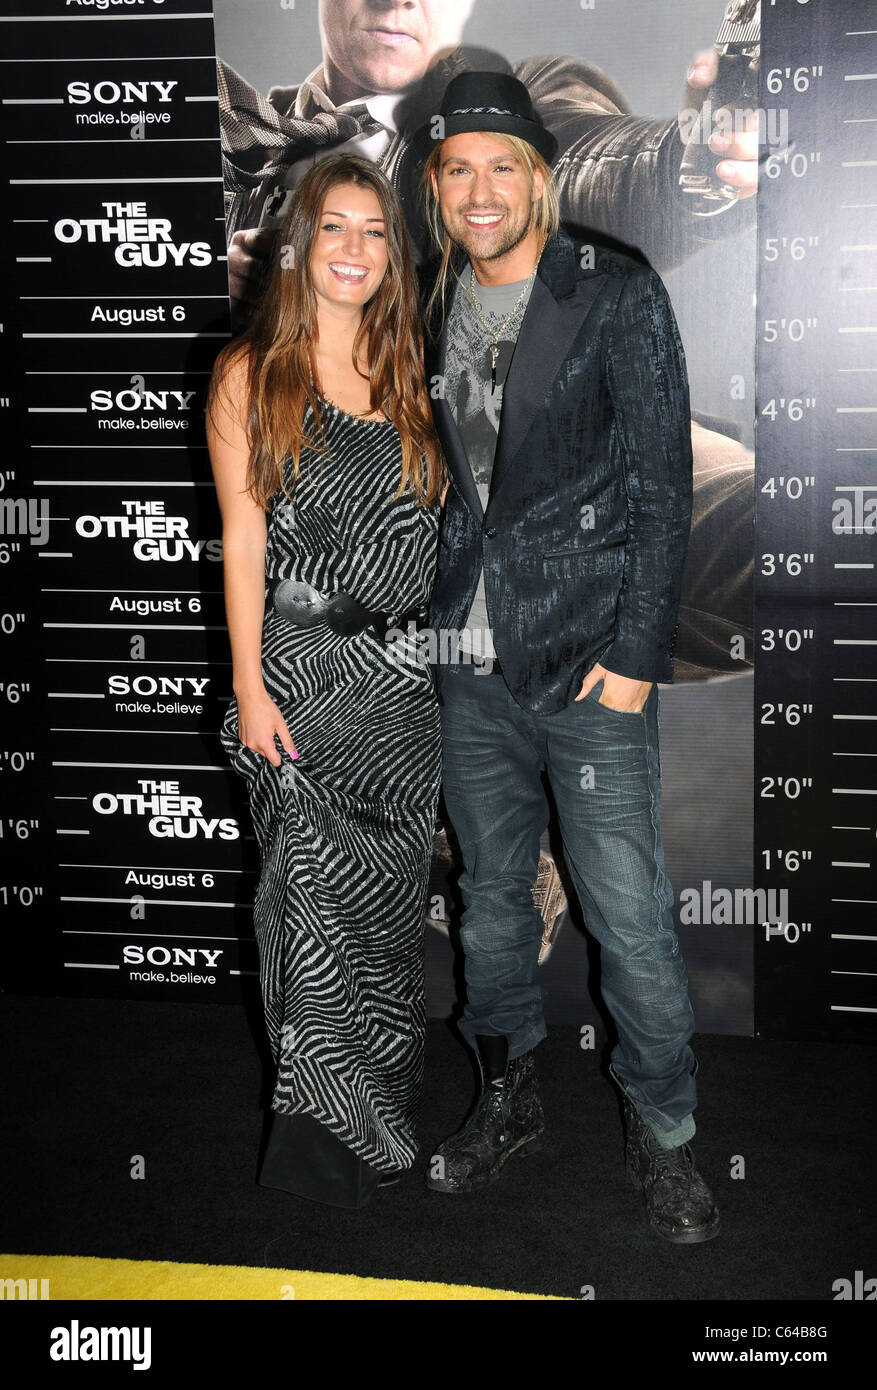 Samantha Swetra, David Garrett at arrivals for THE OTHER GUYS Premiere, The Ziegfeld Theatre, New York, NY August 2, 2010. Photo By: Desiree Navarro/Everett Collection Stock Photo